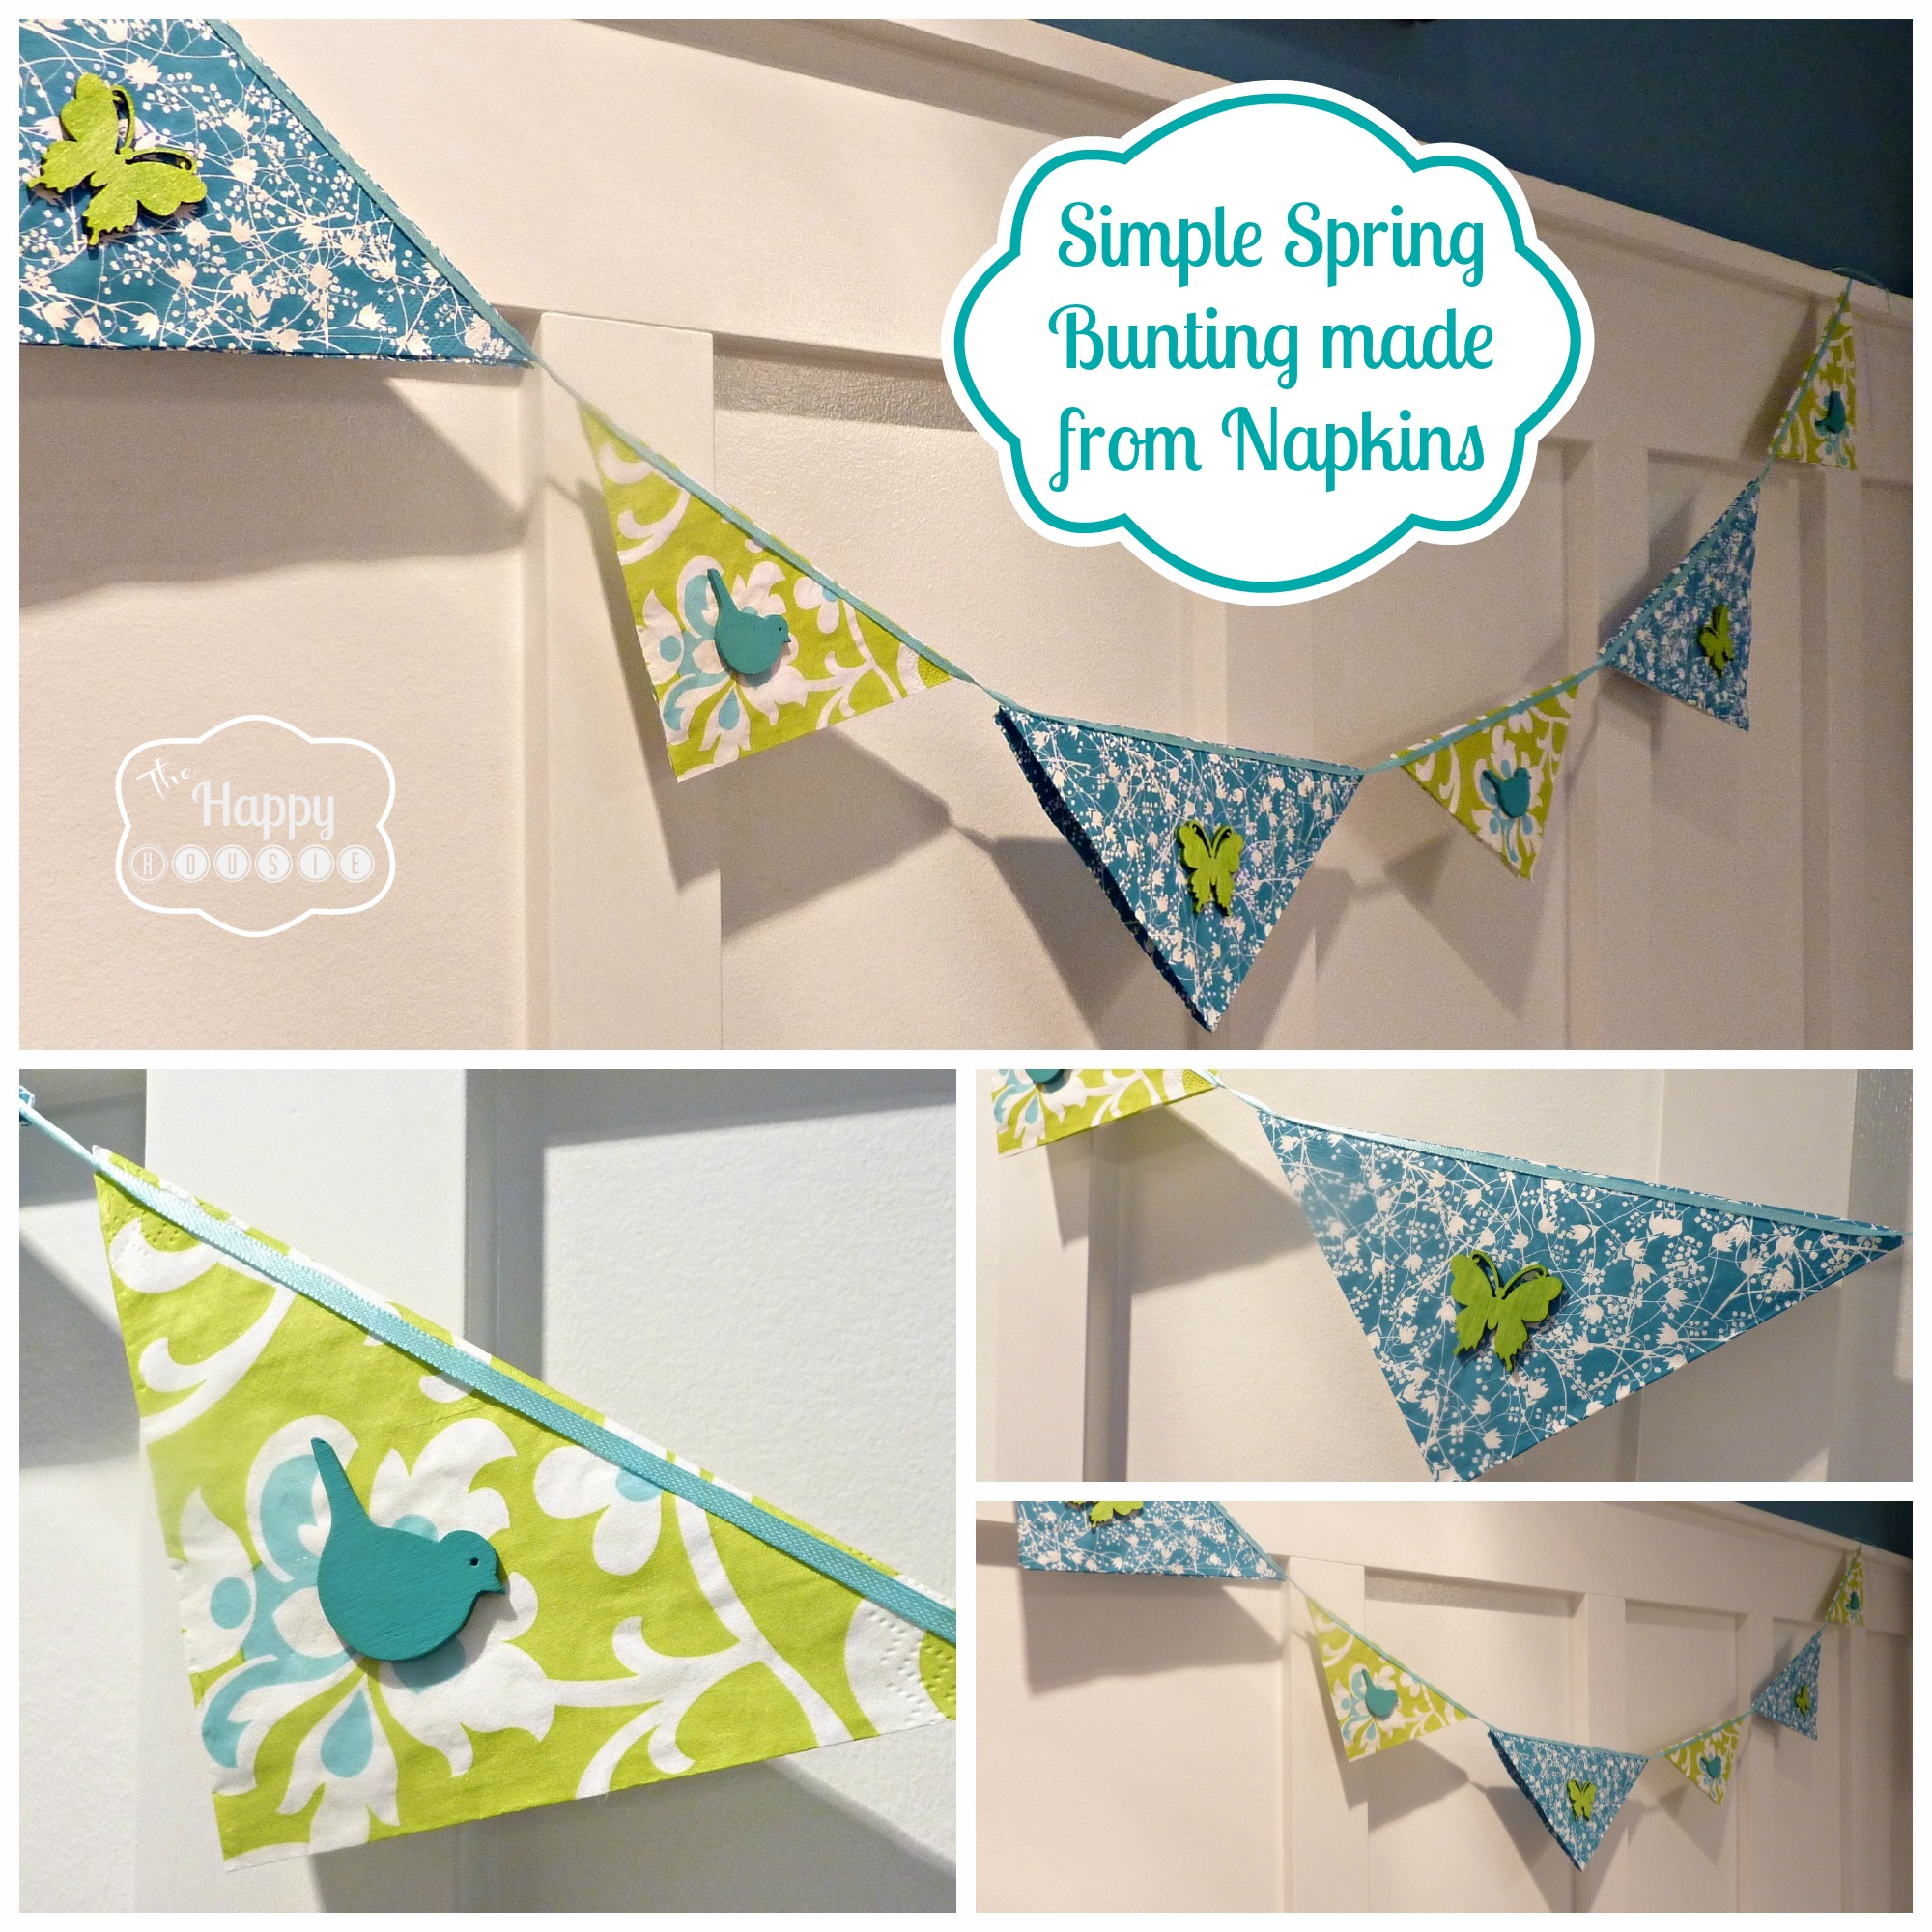 4F Craftin’: Simple Spring Bunting (made from) Napkins